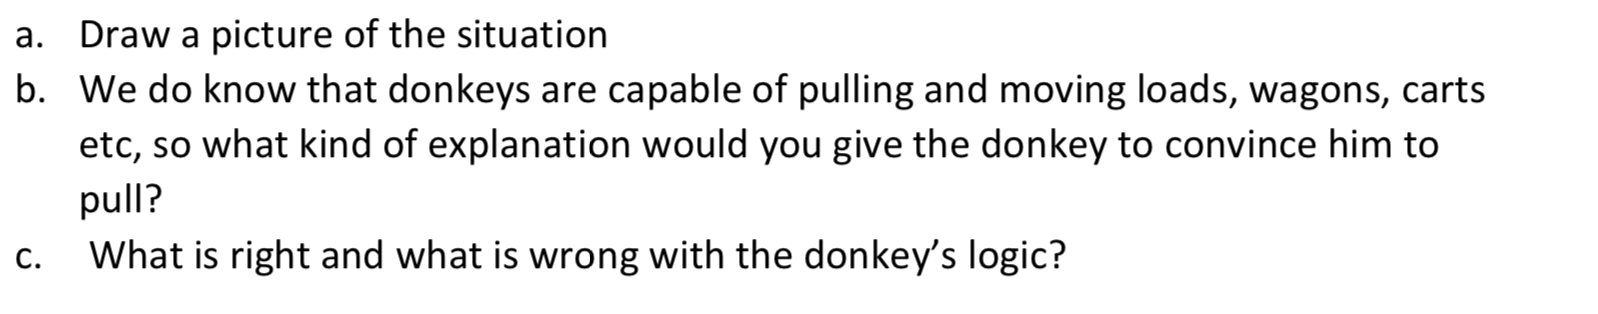 Draw a picture of the situation
b. We do know that donkeys are capable of pulling and moving loads, wagons, carts
a.
etc, so what kind of explanation would you give the donkey to convince him to
pull?
What is right and what is wrong with the donkey's logic?
C.
